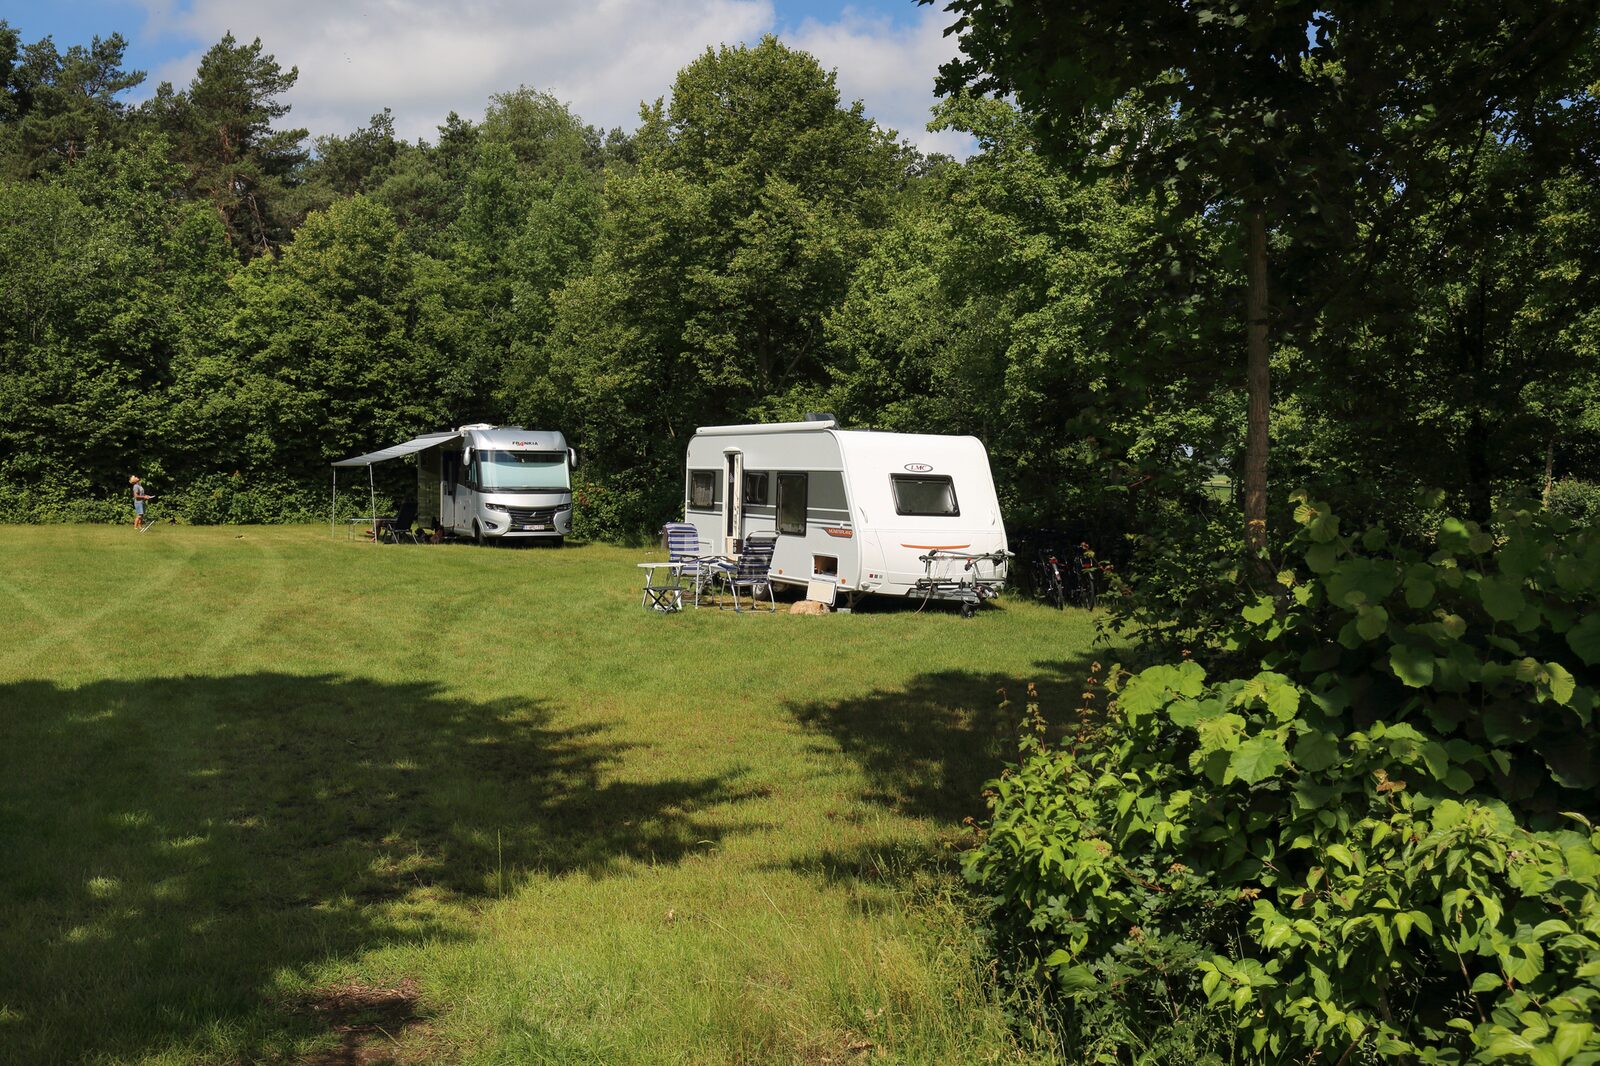 Camping pitch incl. 2 persons, excl. electricity